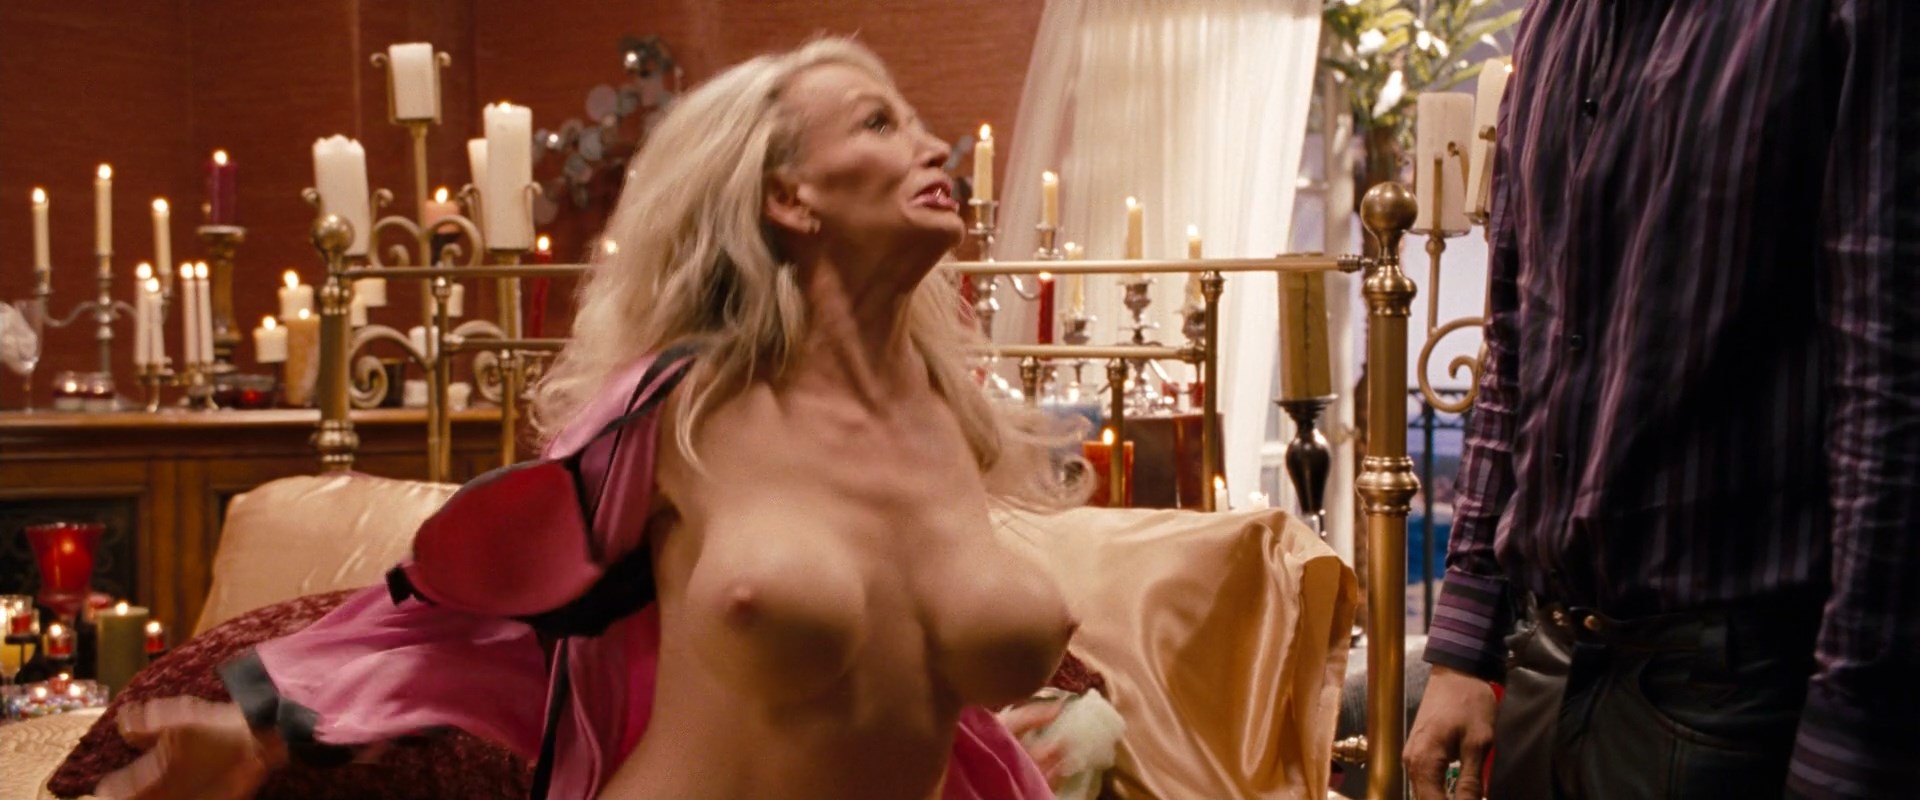 Taaffe O’Connell shows her huge tits while filming a scene with Deadpool.